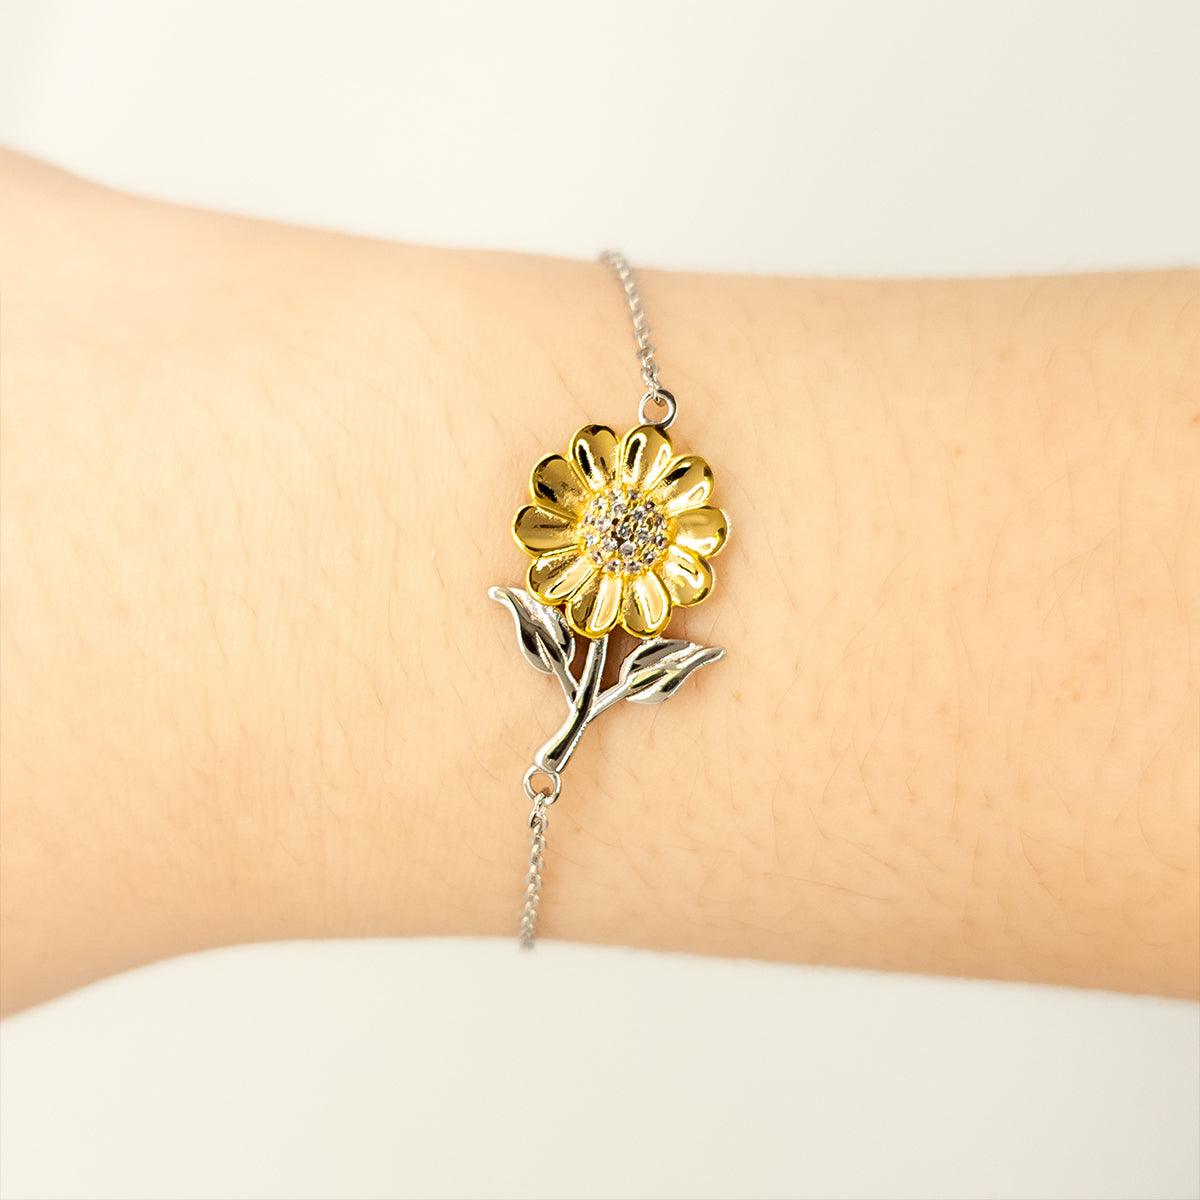 Motivational Stepbrother Sunflower Bracelet - I can promise to love you for the rest of my life, Birthday, Christmas Holiday Jewelry Gift - Mallard Moon Gift Shop